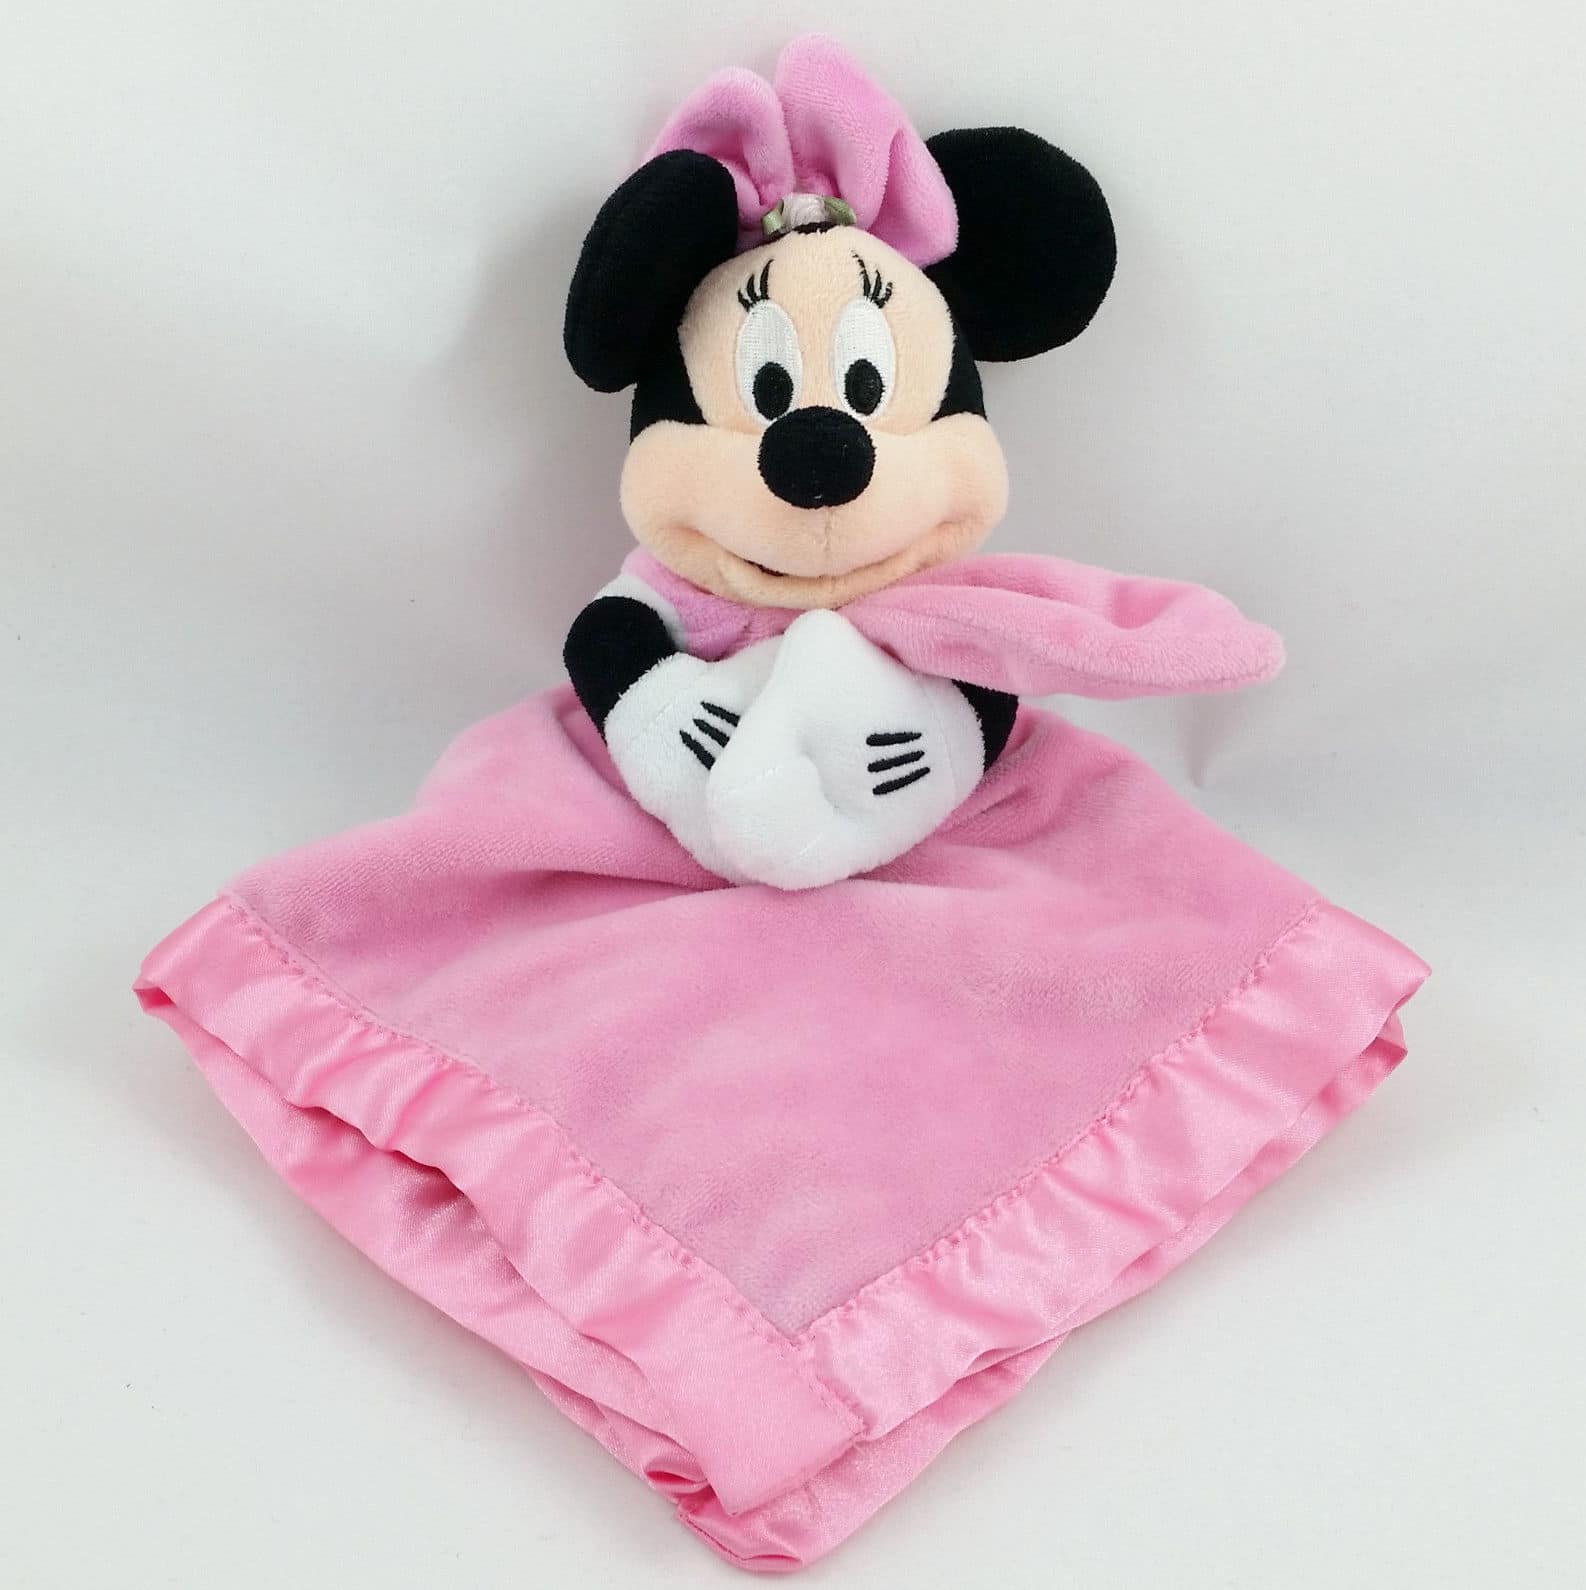 Minnie Mouse Baby Toy Idea